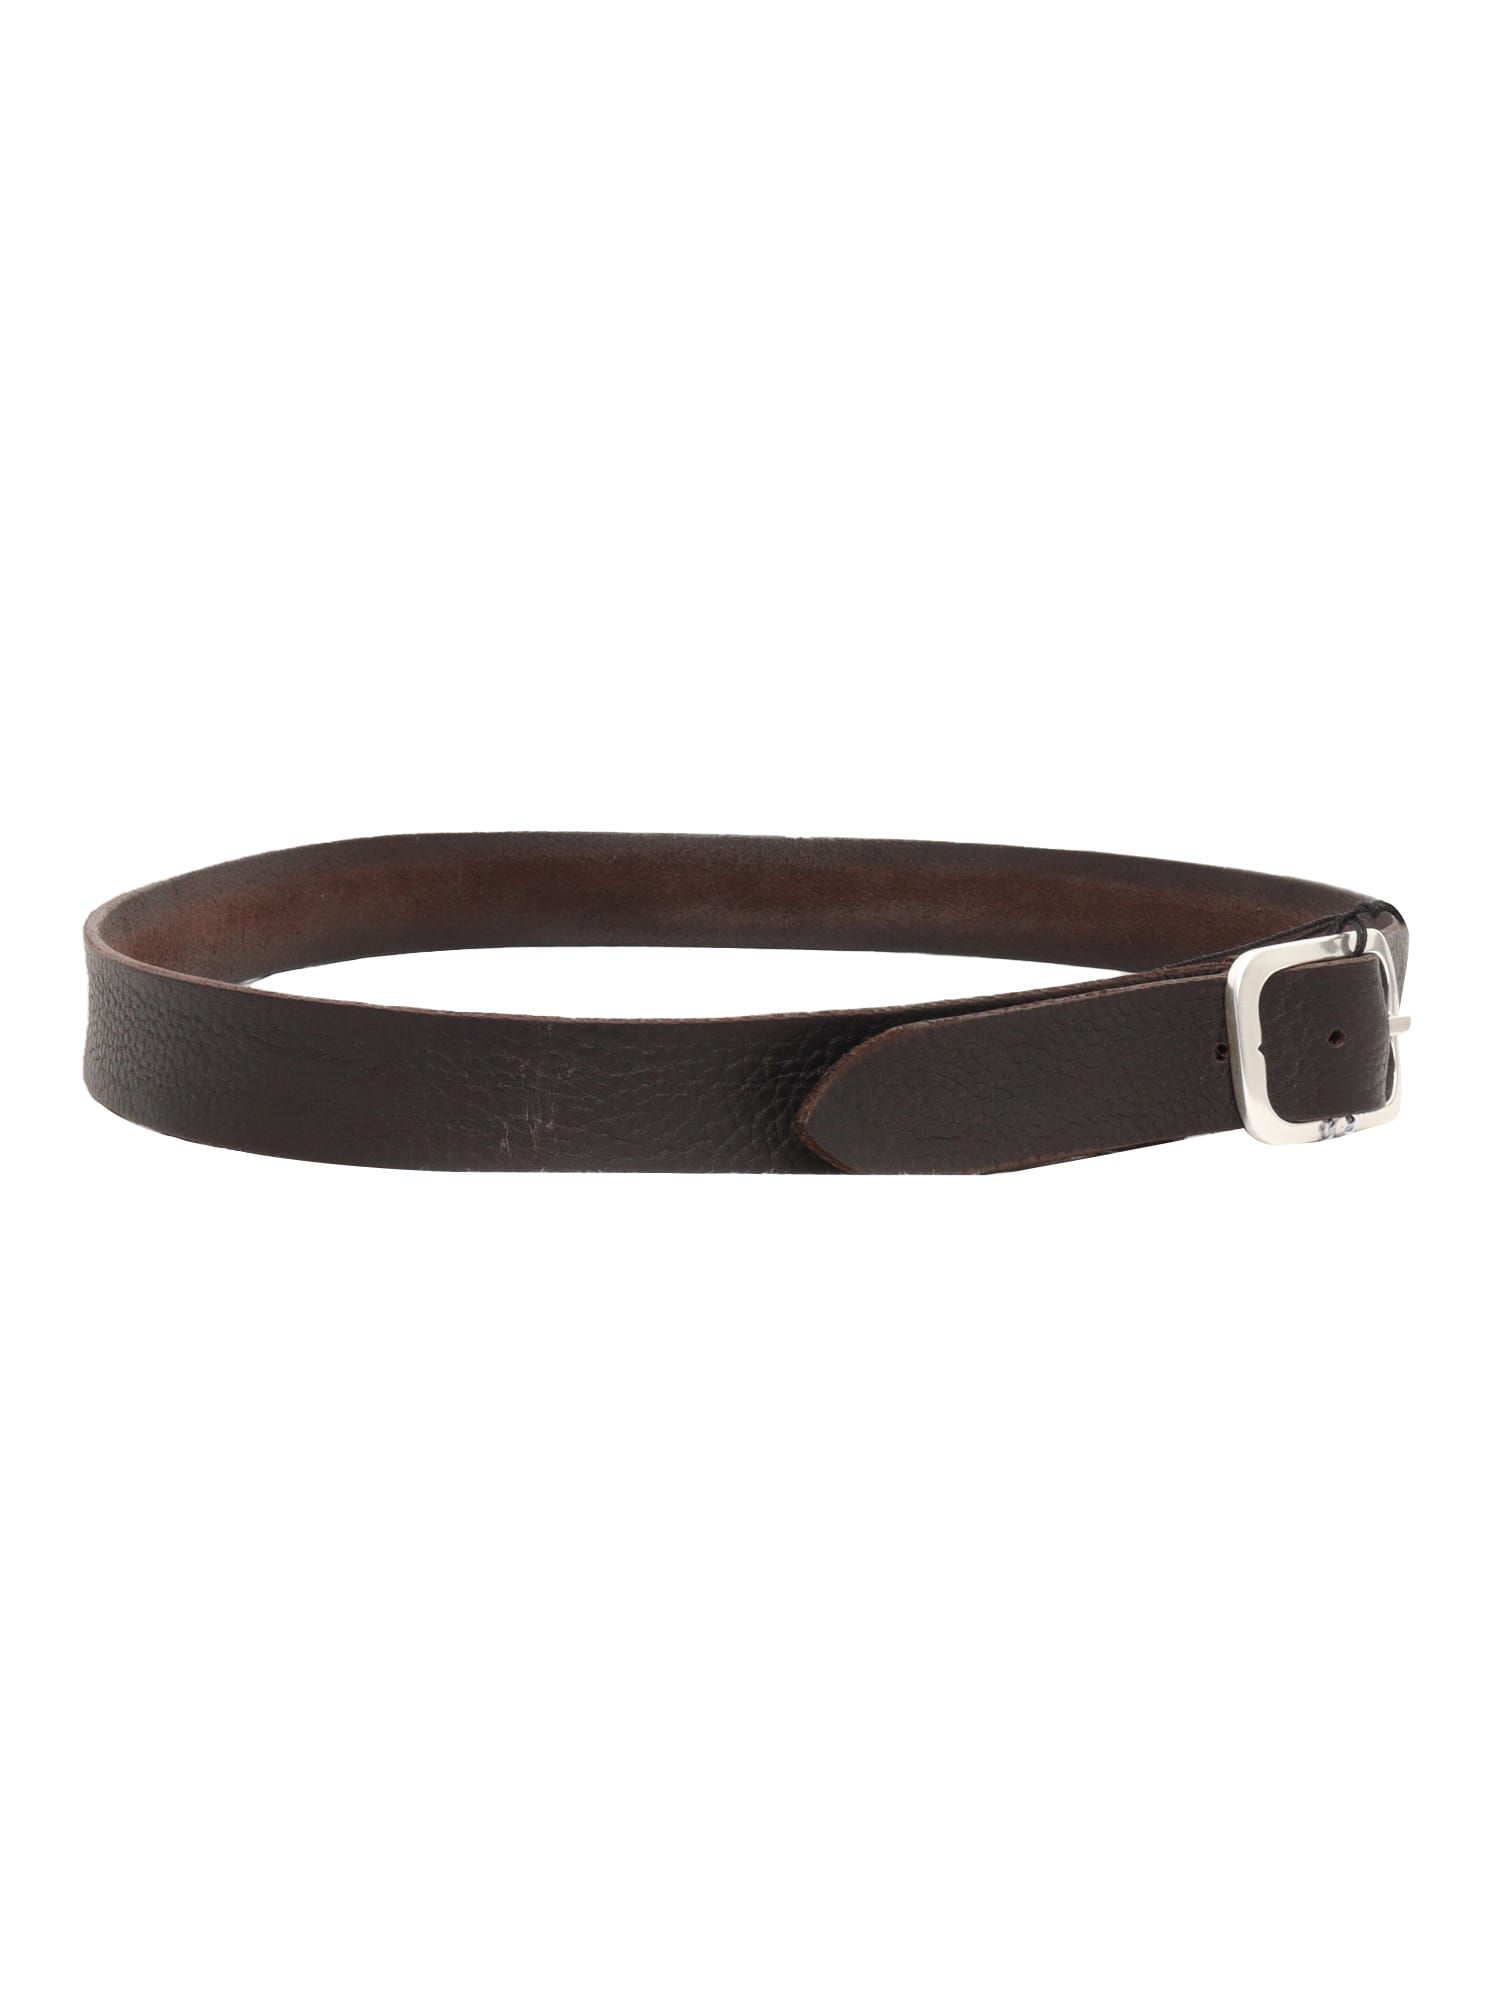 Shop Orciani Brown Leather Belt